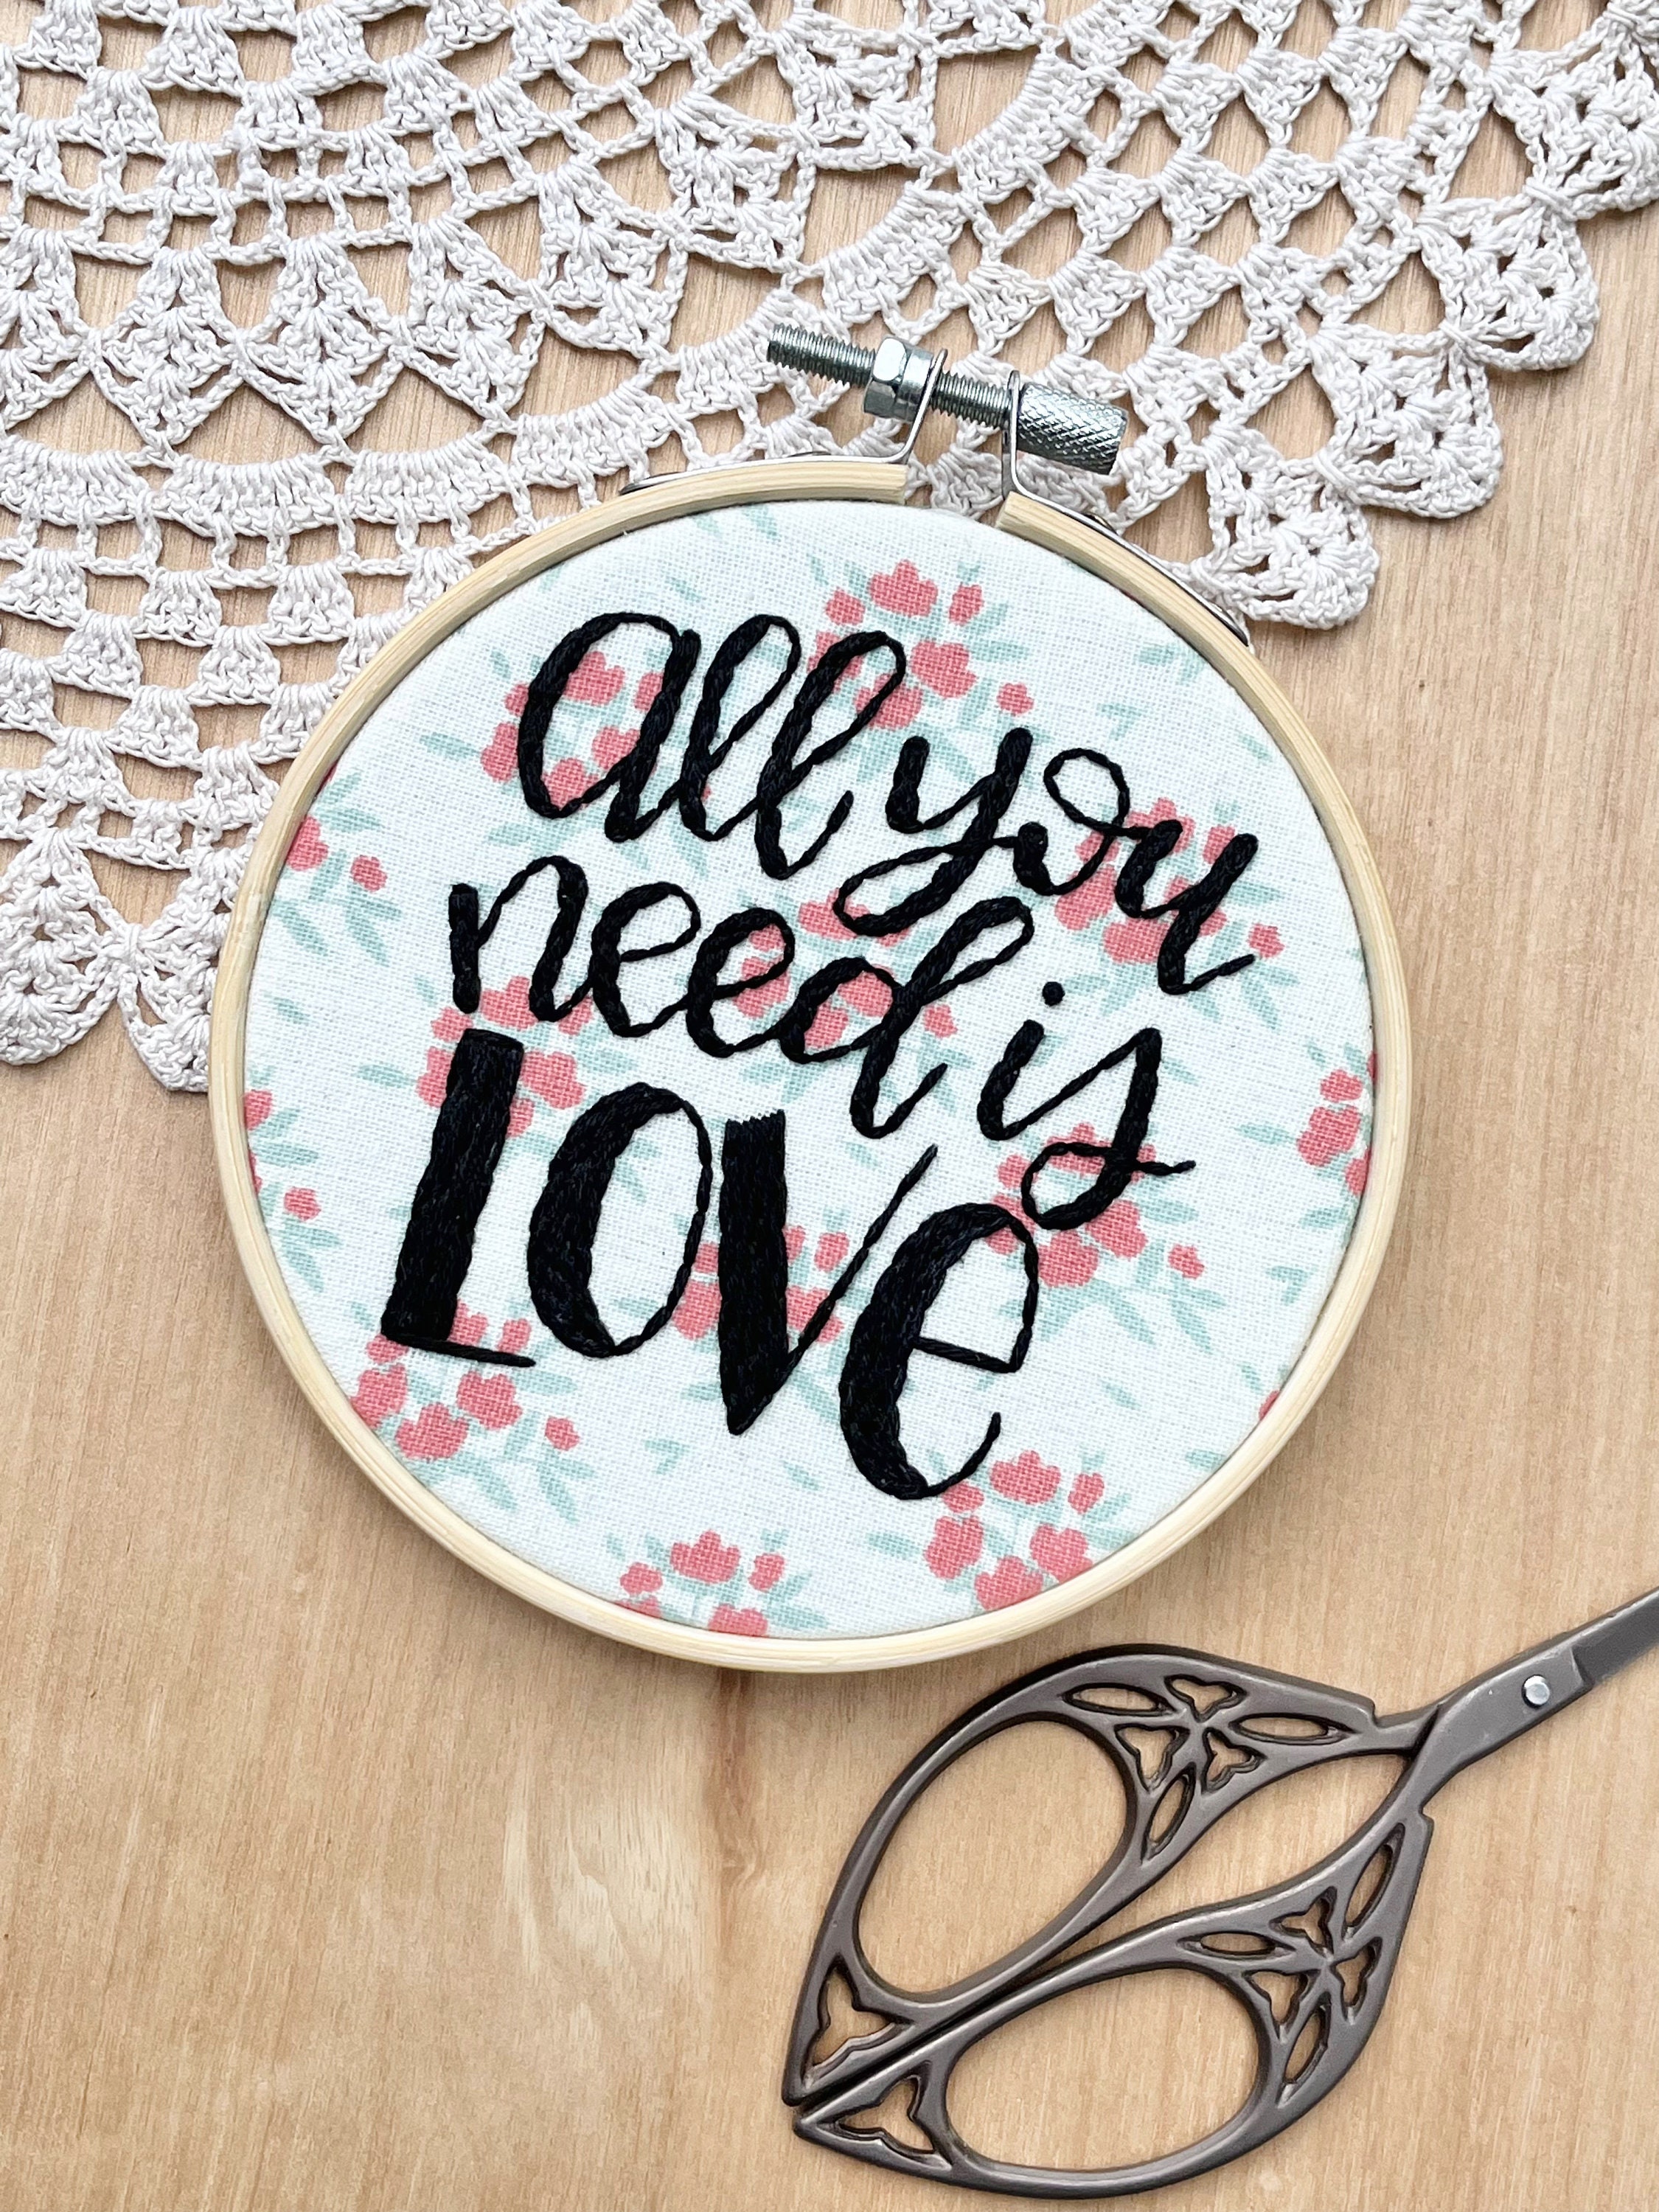 All You Need is Love - Floral Embroidery Hoop Art 